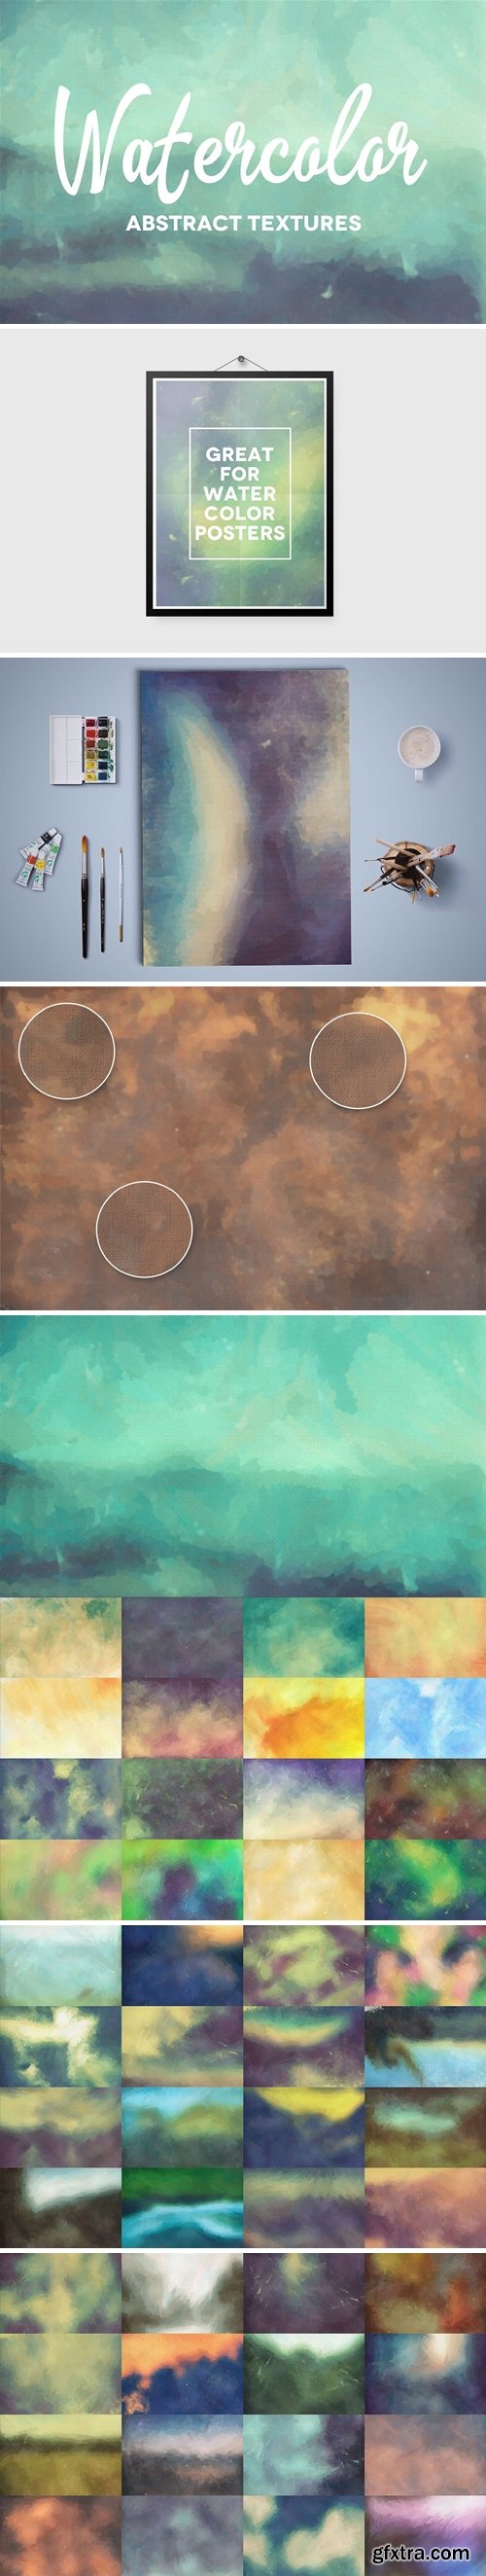 50 Abstract Watercolor Textures